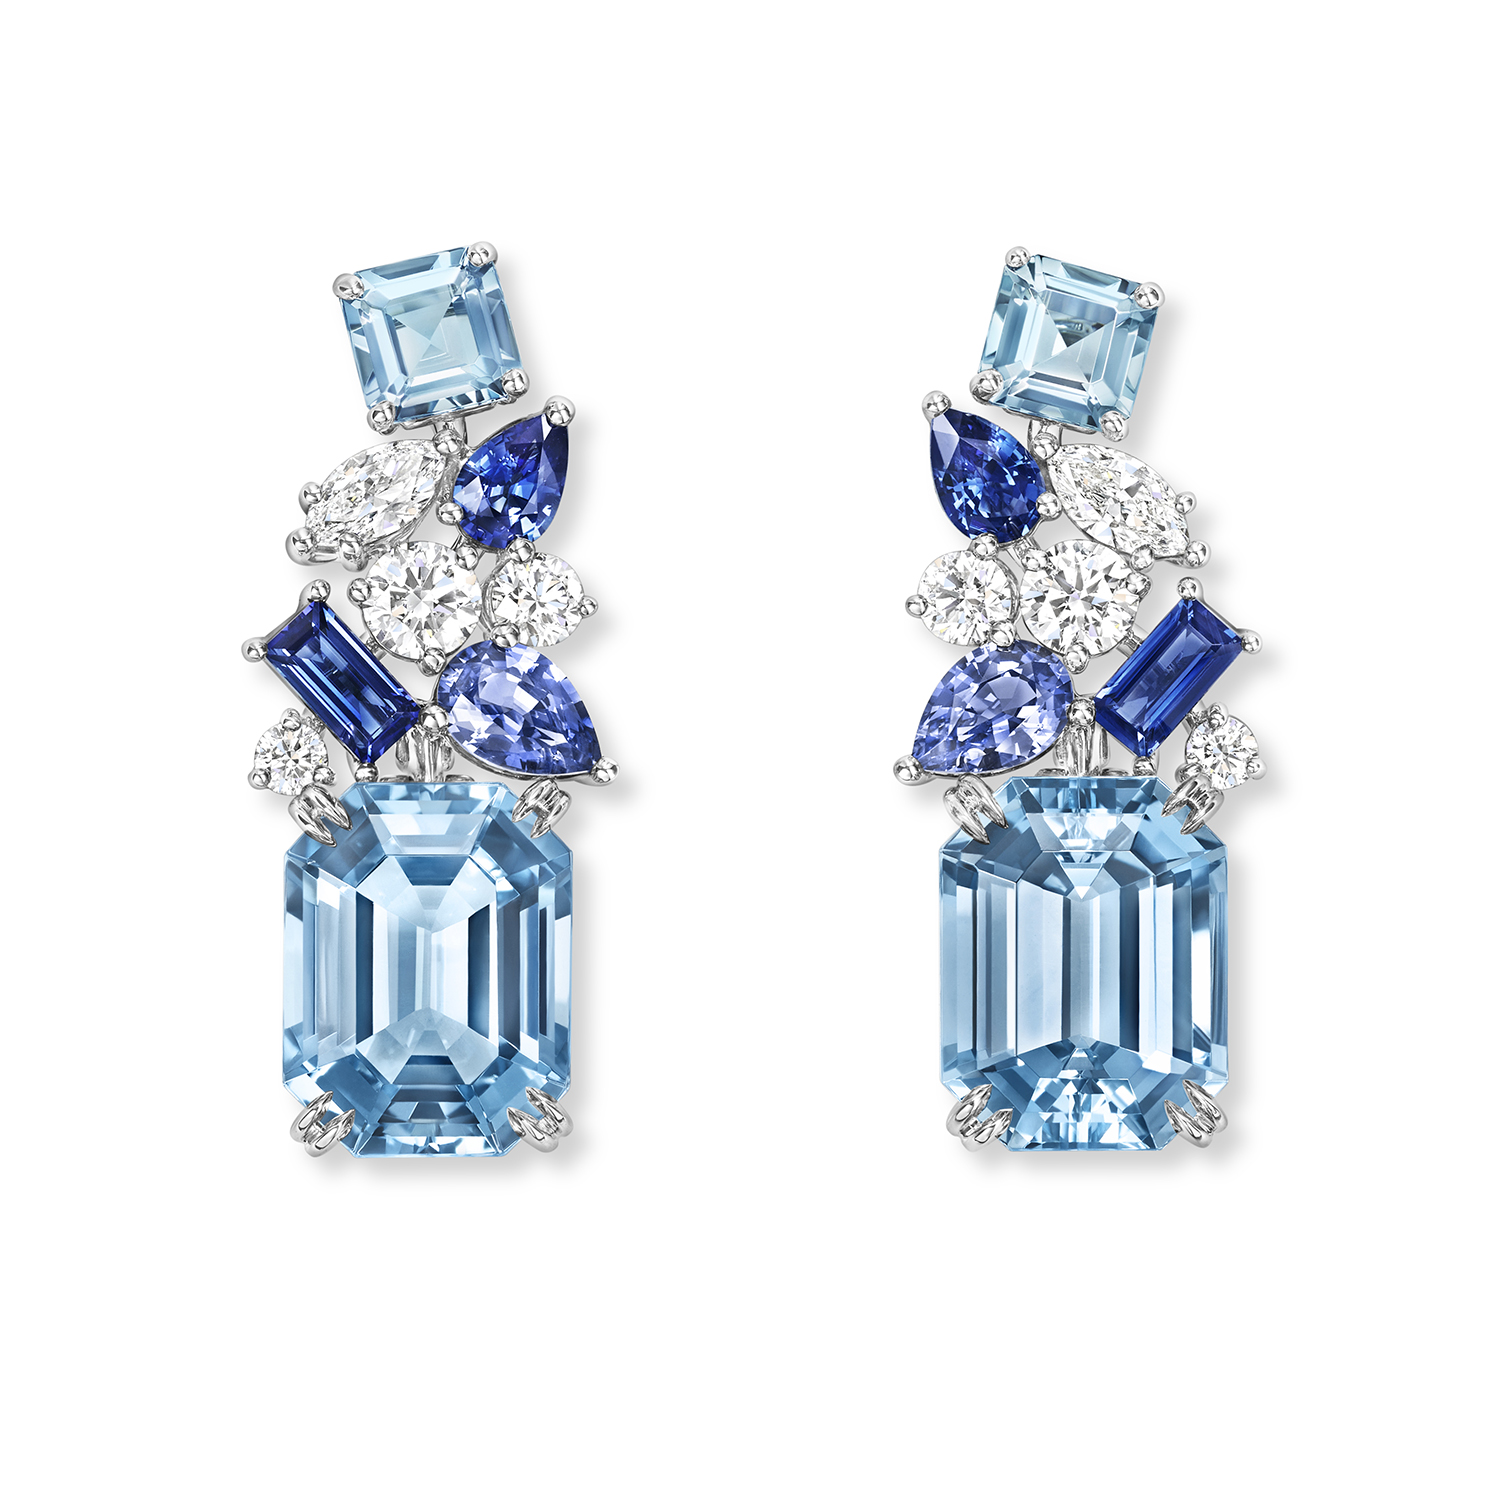 Harry Winston’s Majestic Escapes Collection Captures the Spirit of ...